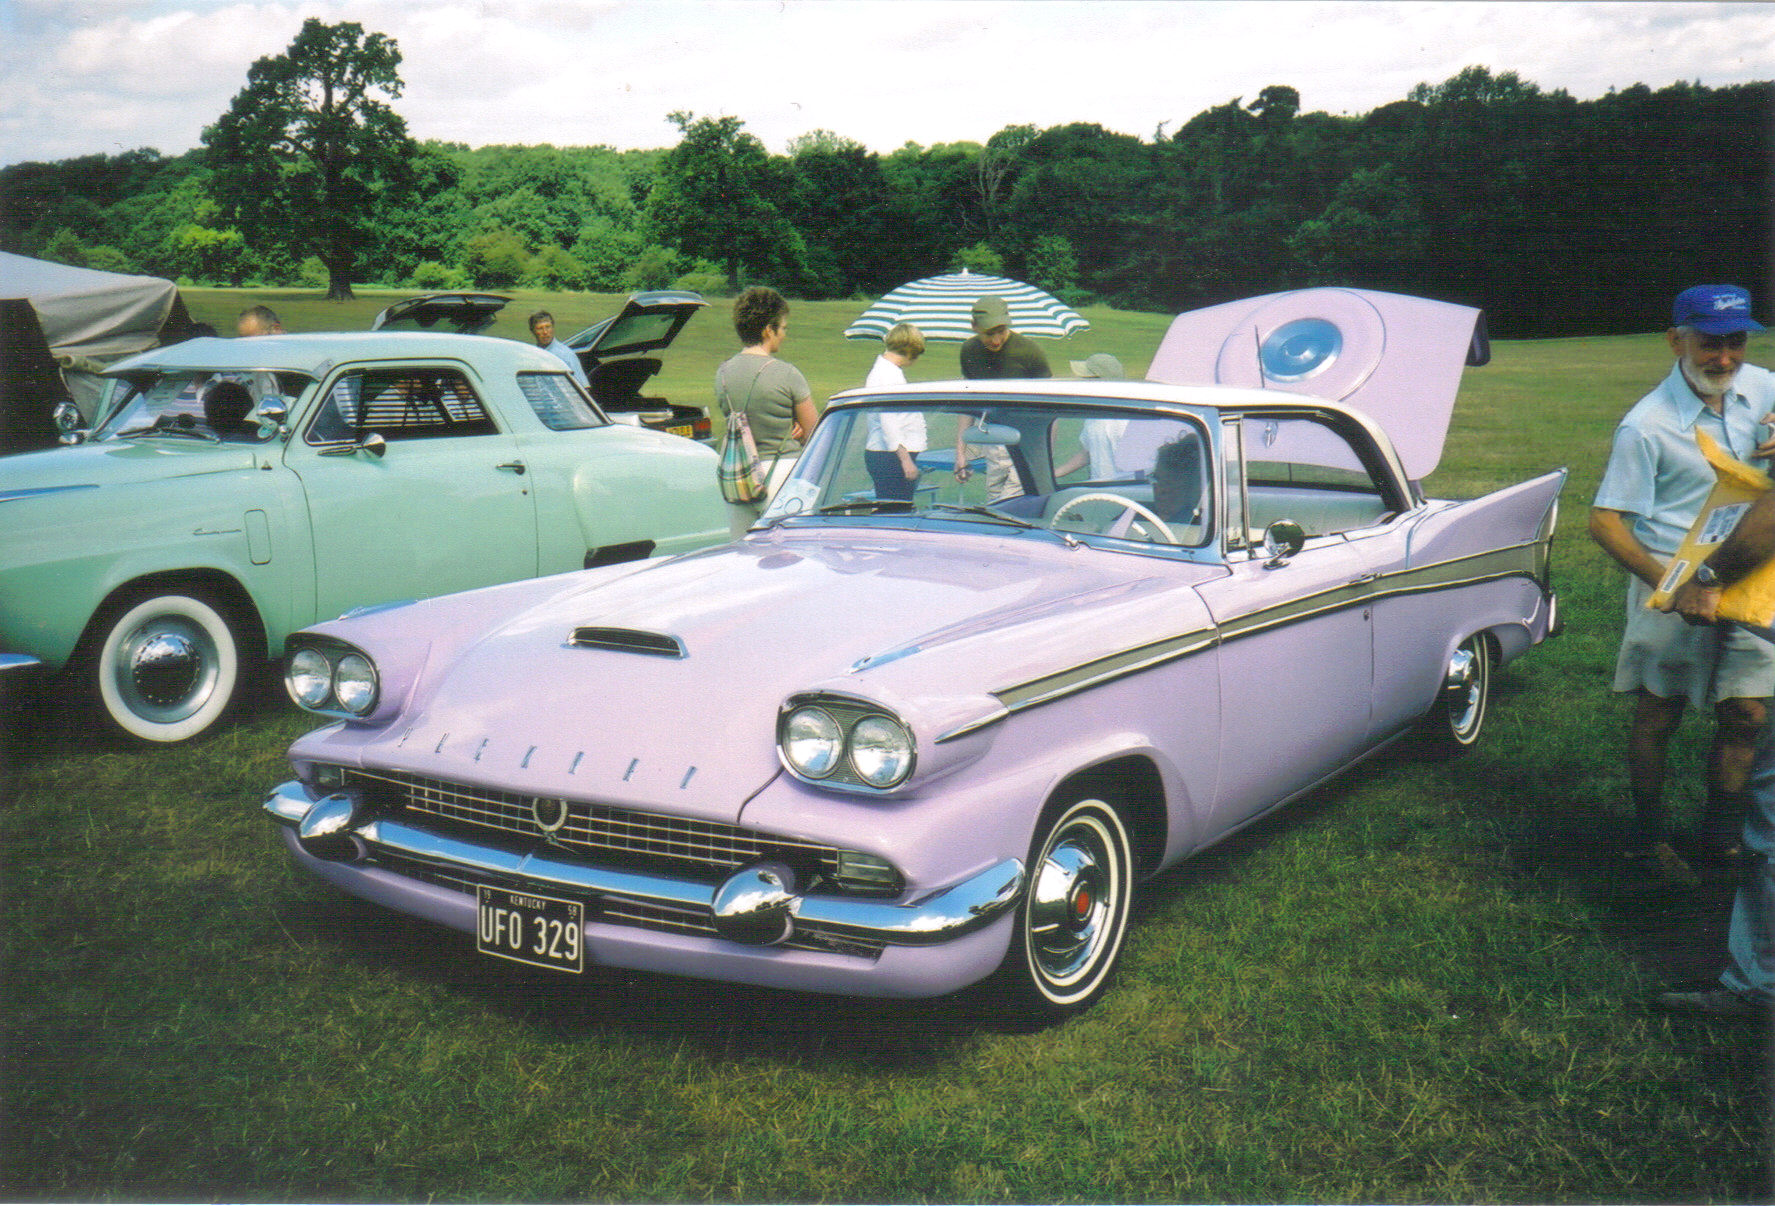 1958 Packard Hawk Coupe in England. | Flickr - Photo Sharing!